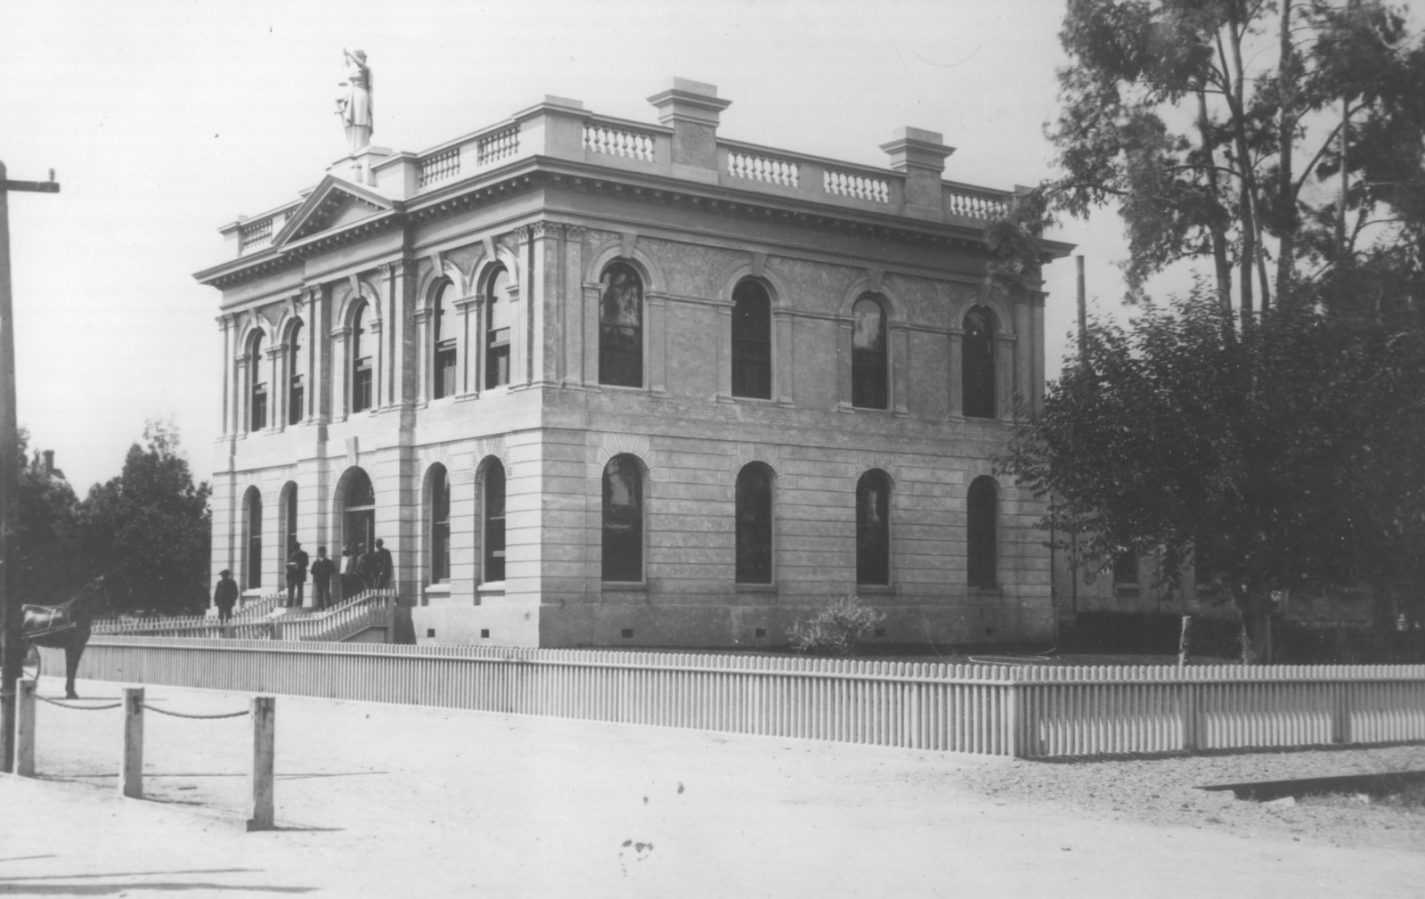 Archival exterior photo of second county courthouse of San Mateo County